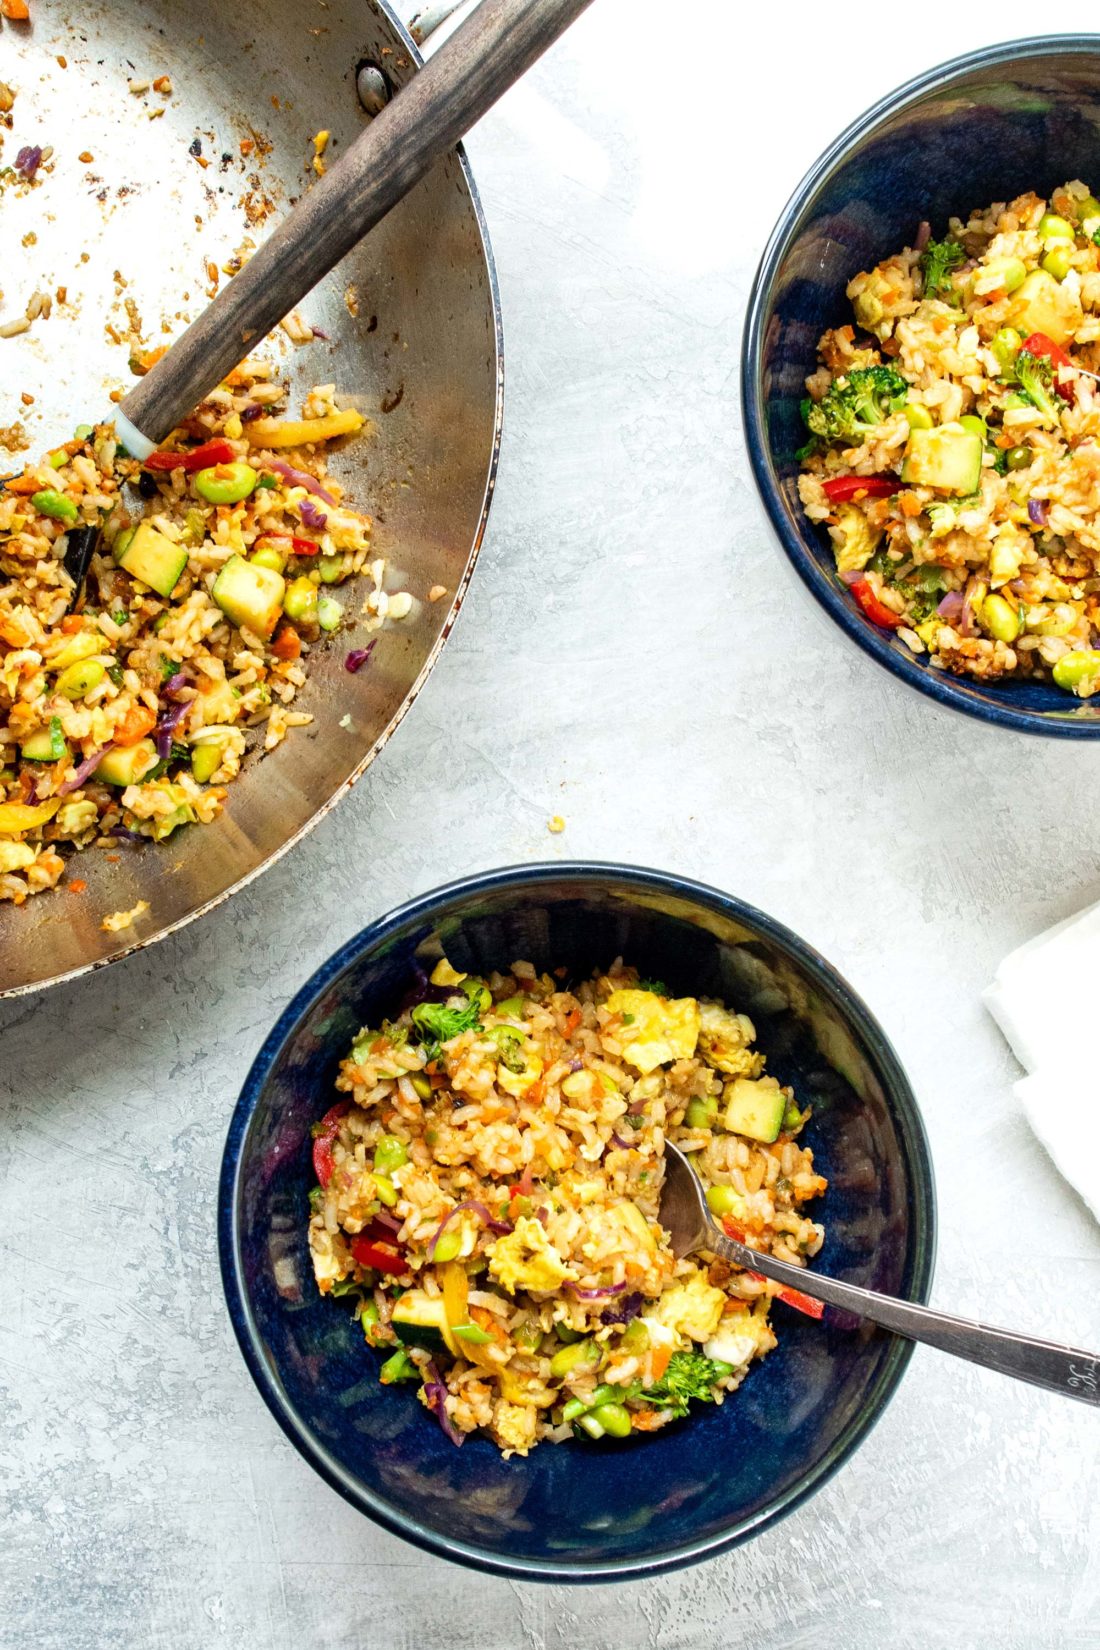 Vegetable Stir Fried Rice in bowls and a wok.